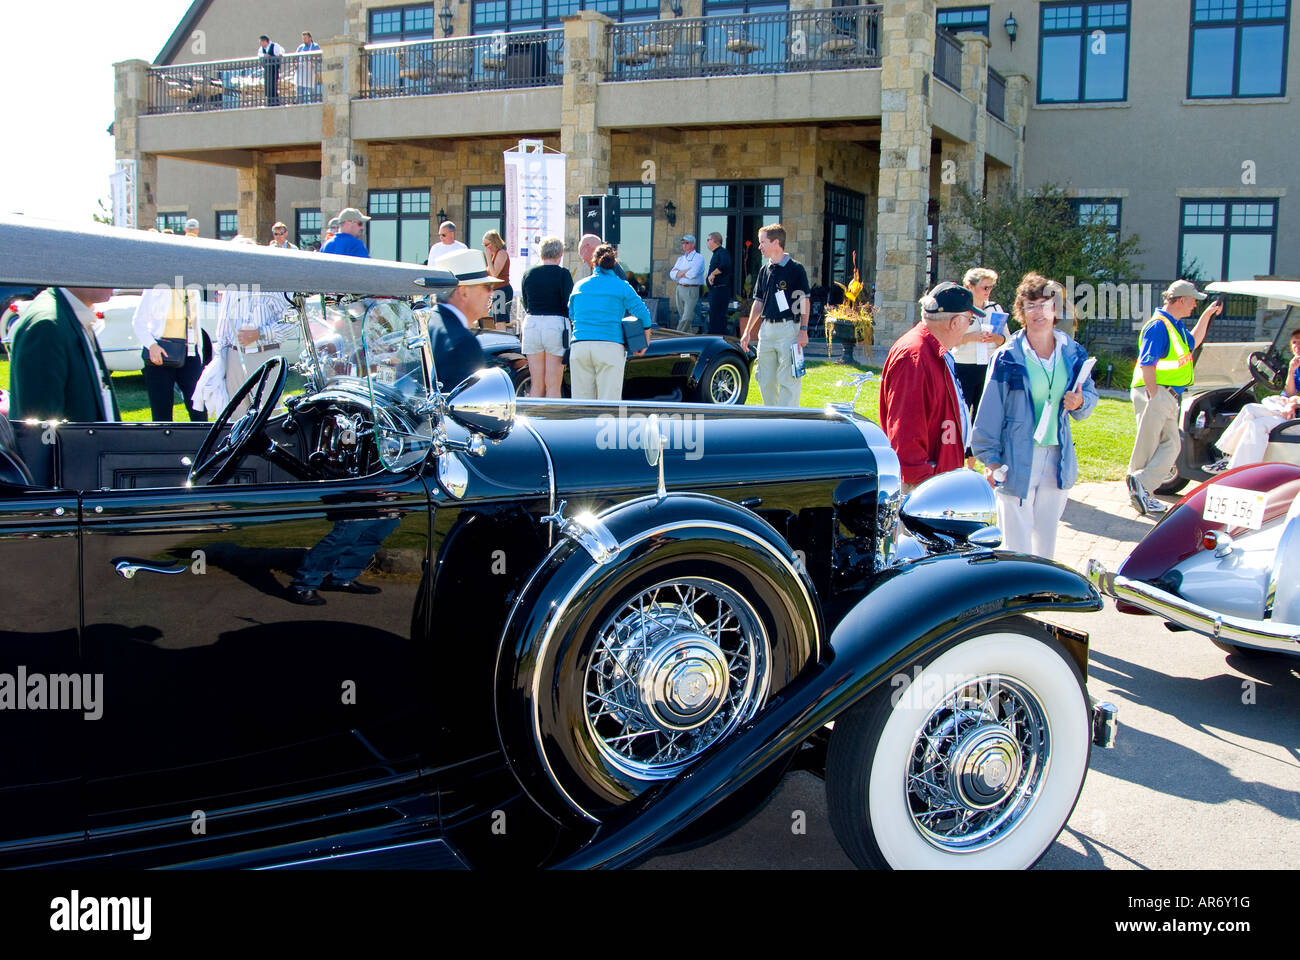 2007 Inaugural Barrington Concours D Elegance -Makray Memmorial Golf Course Clubhouse and Vintage 1932 Buick 95 Sport Phaeton Stock Photo